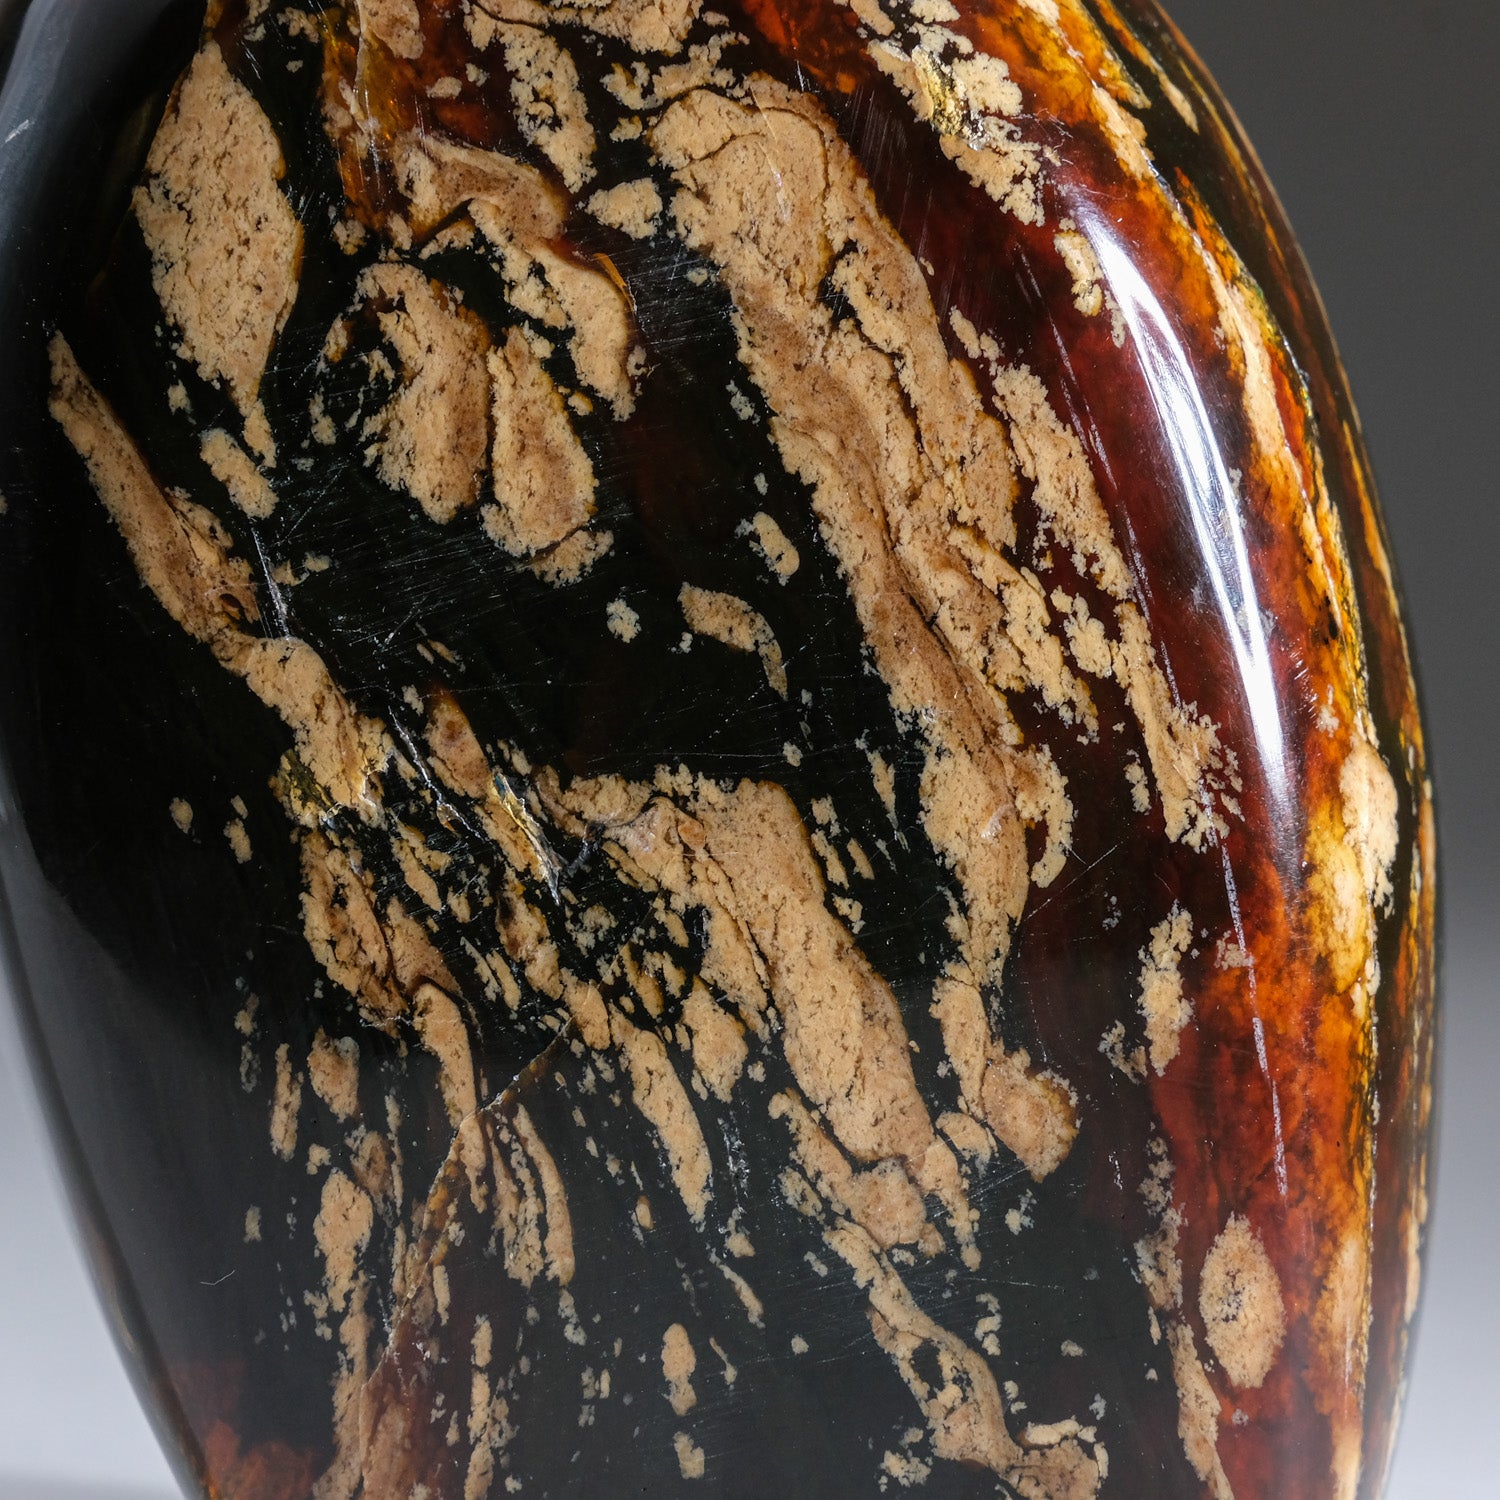 Polished Amber Freeform from Indonesia (314.5 grams)